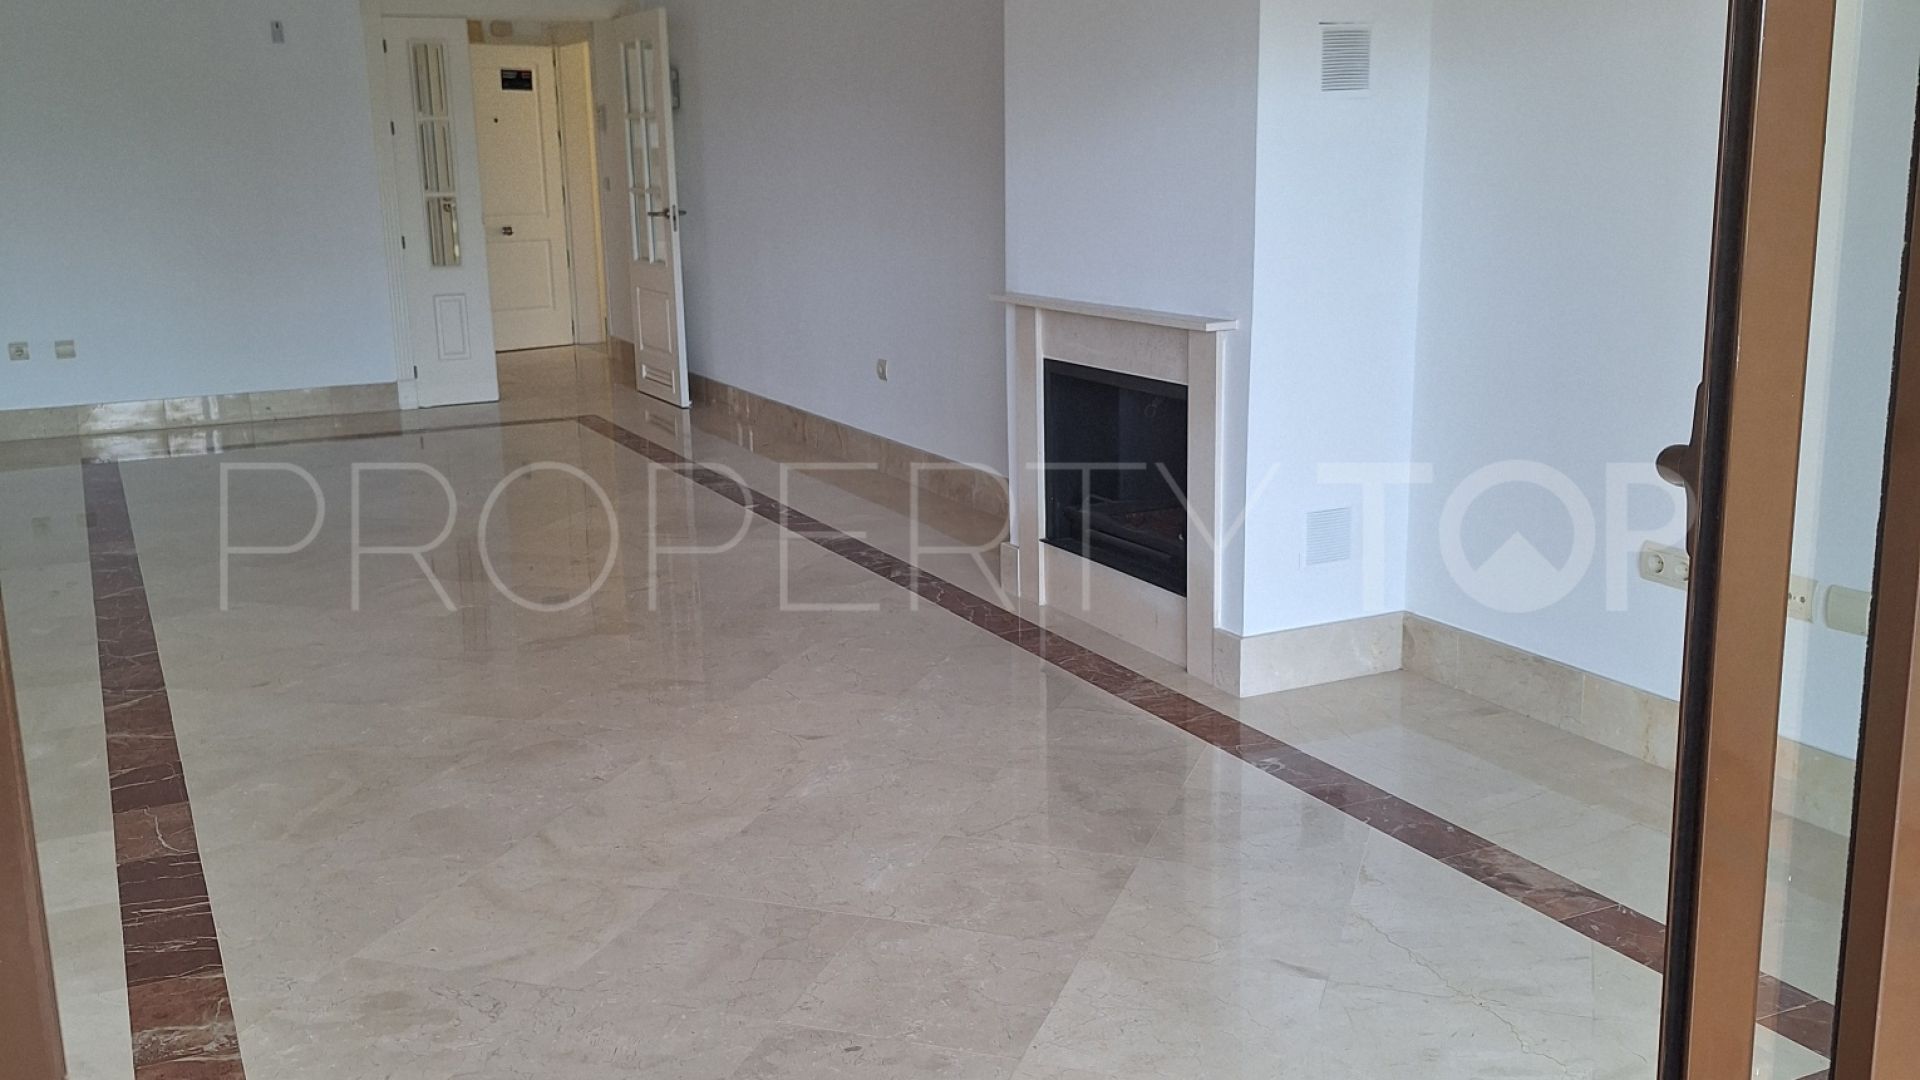 For sale apartment with 2 bedrooms in Ribera del Paraiso